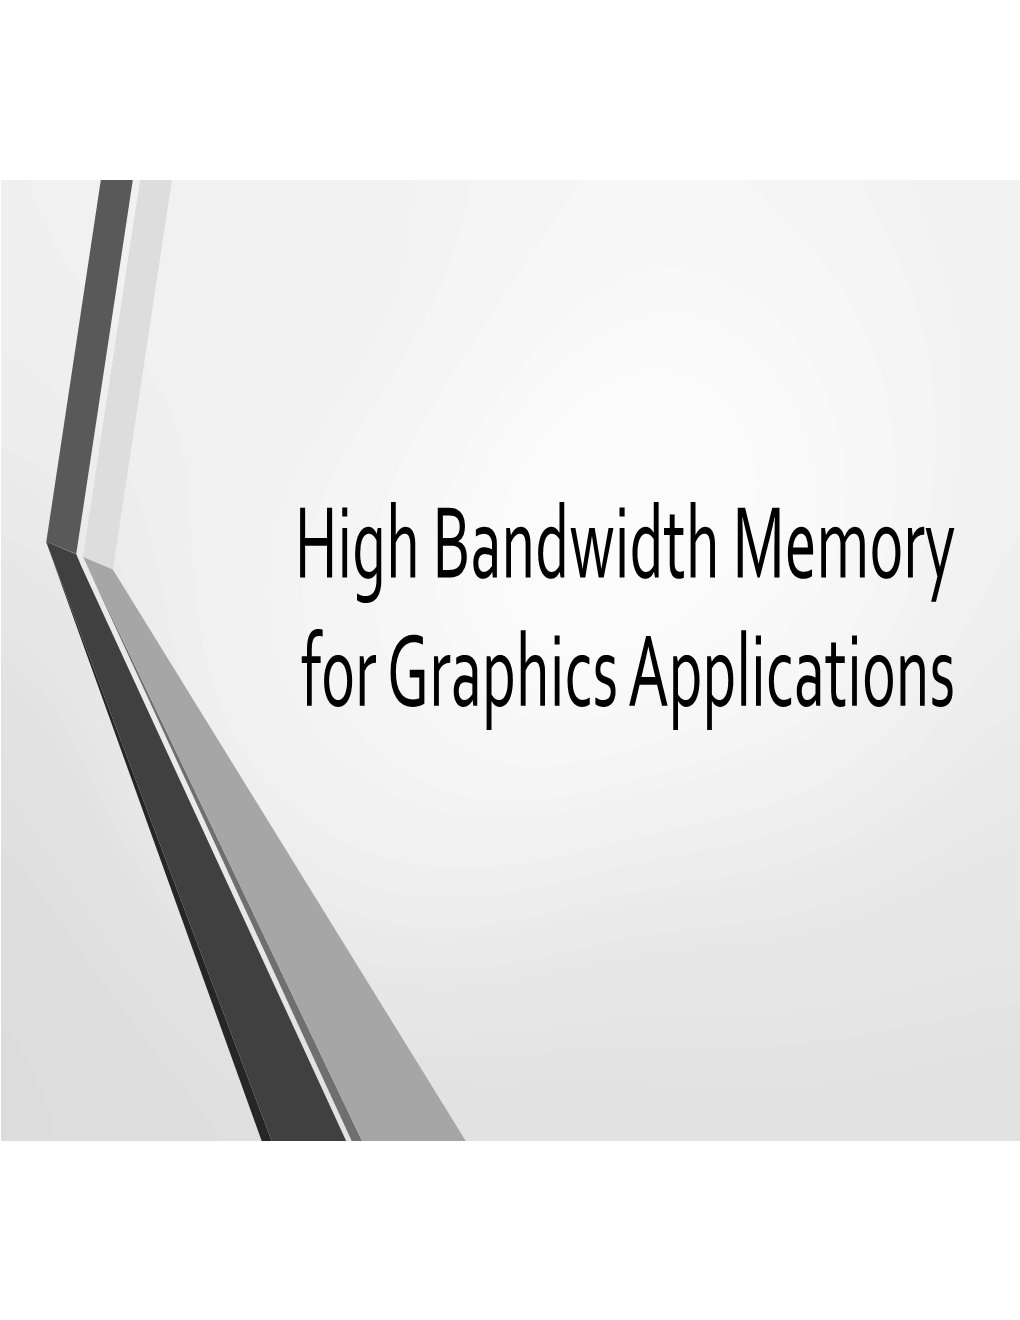 High Bandwidth Memory for Graphics Applications Contents